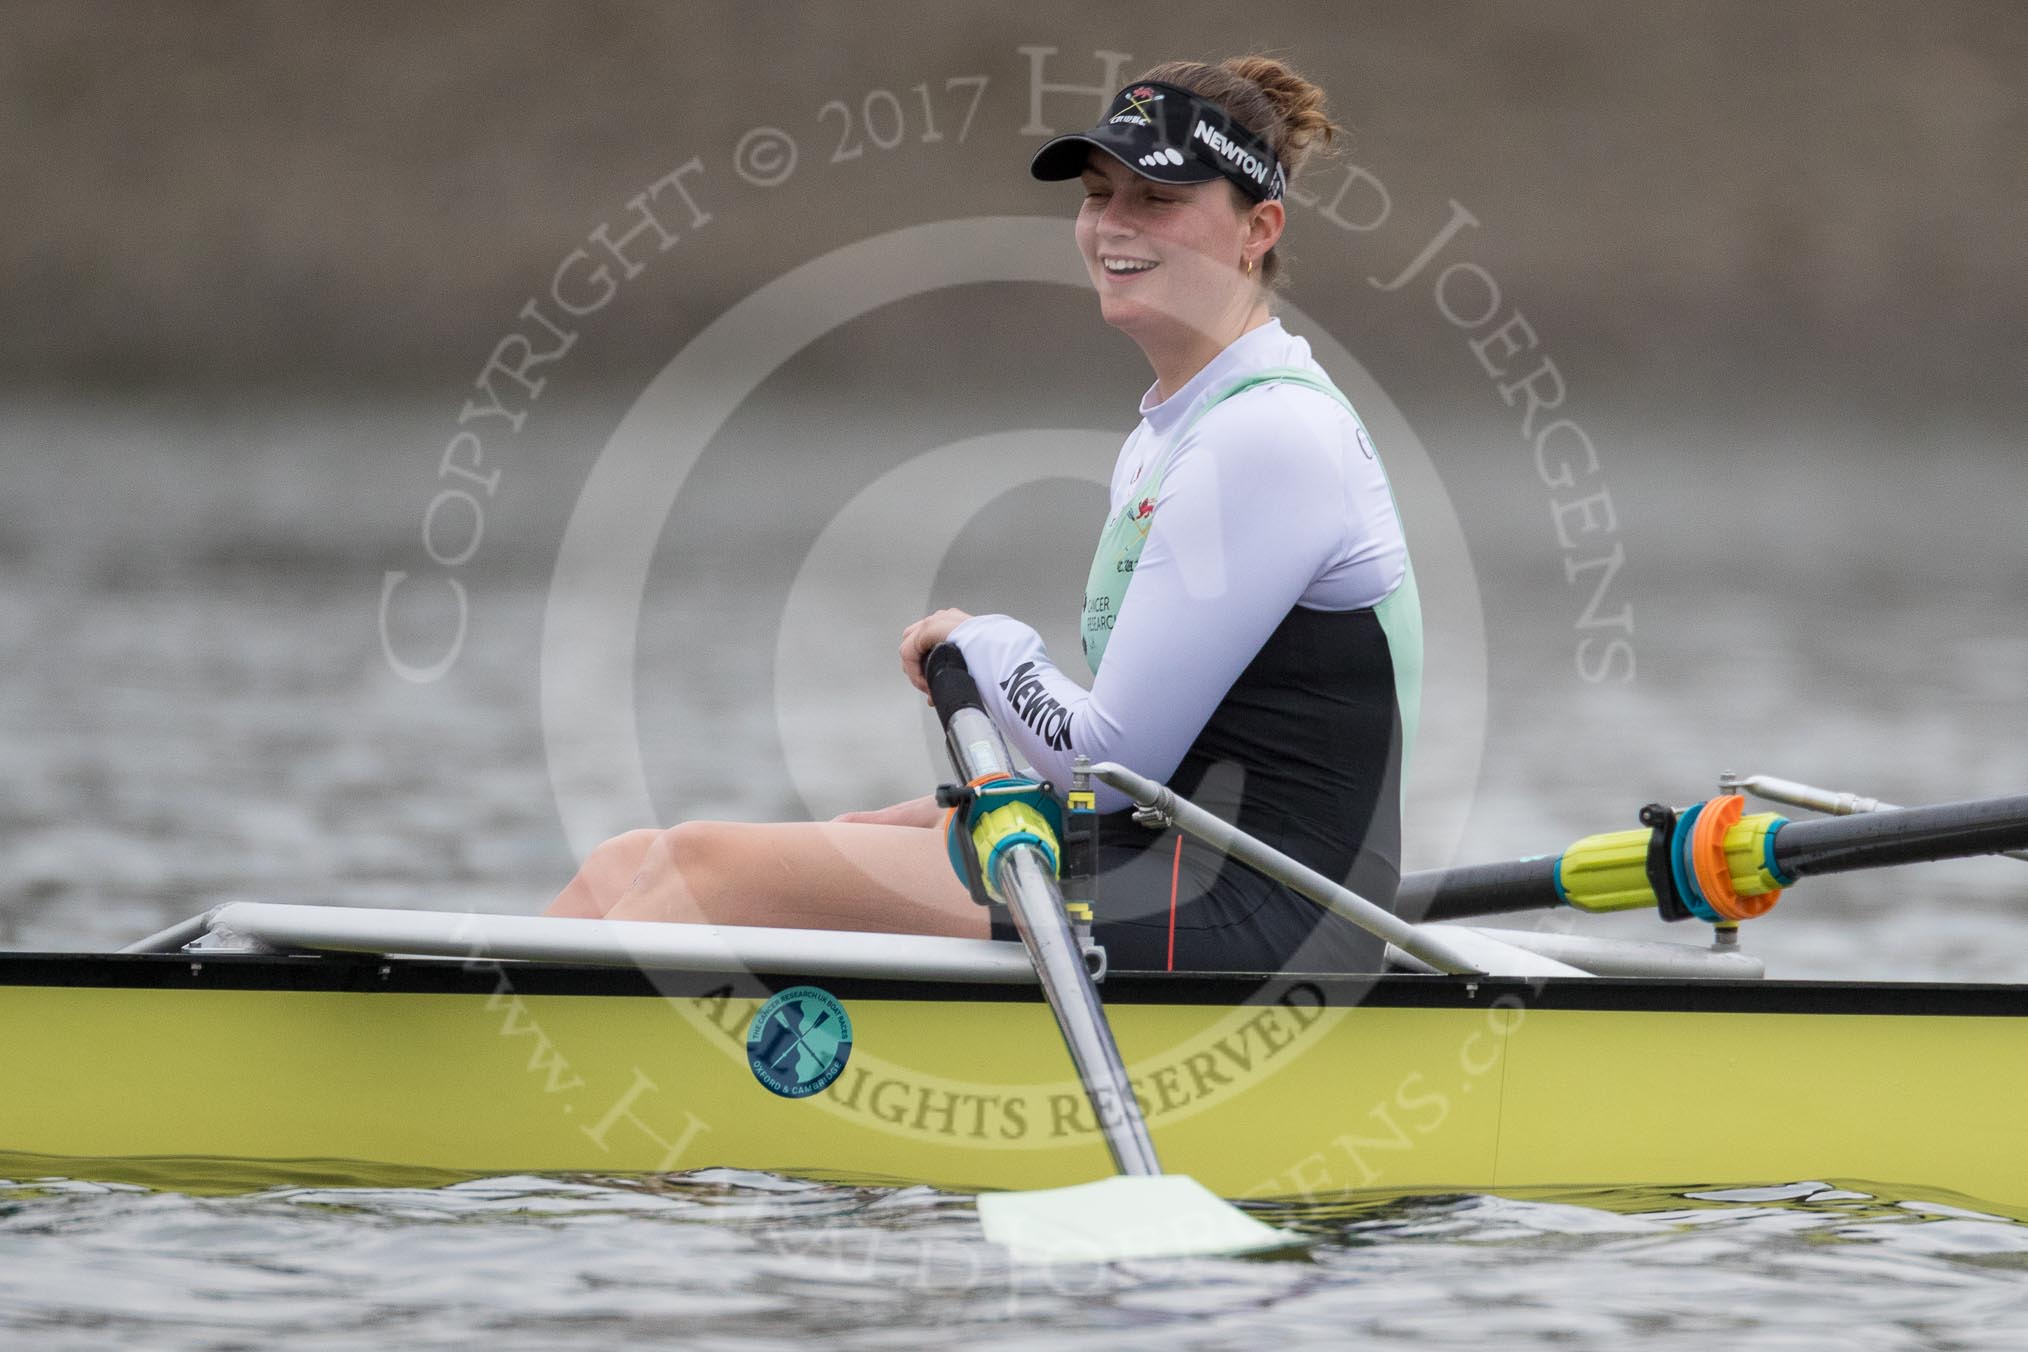 The Boat Race season 2017 - Women's Boat Race Fixture CUWBC vs Univerity of London: The CUWBC eight before the start of the race, here 7 - Myriam Goudet.
River Thames between Putney Bridge and Mortlake,
London SW15,

United Kingdom,
on 19 February 2017 at 15:53, image #36